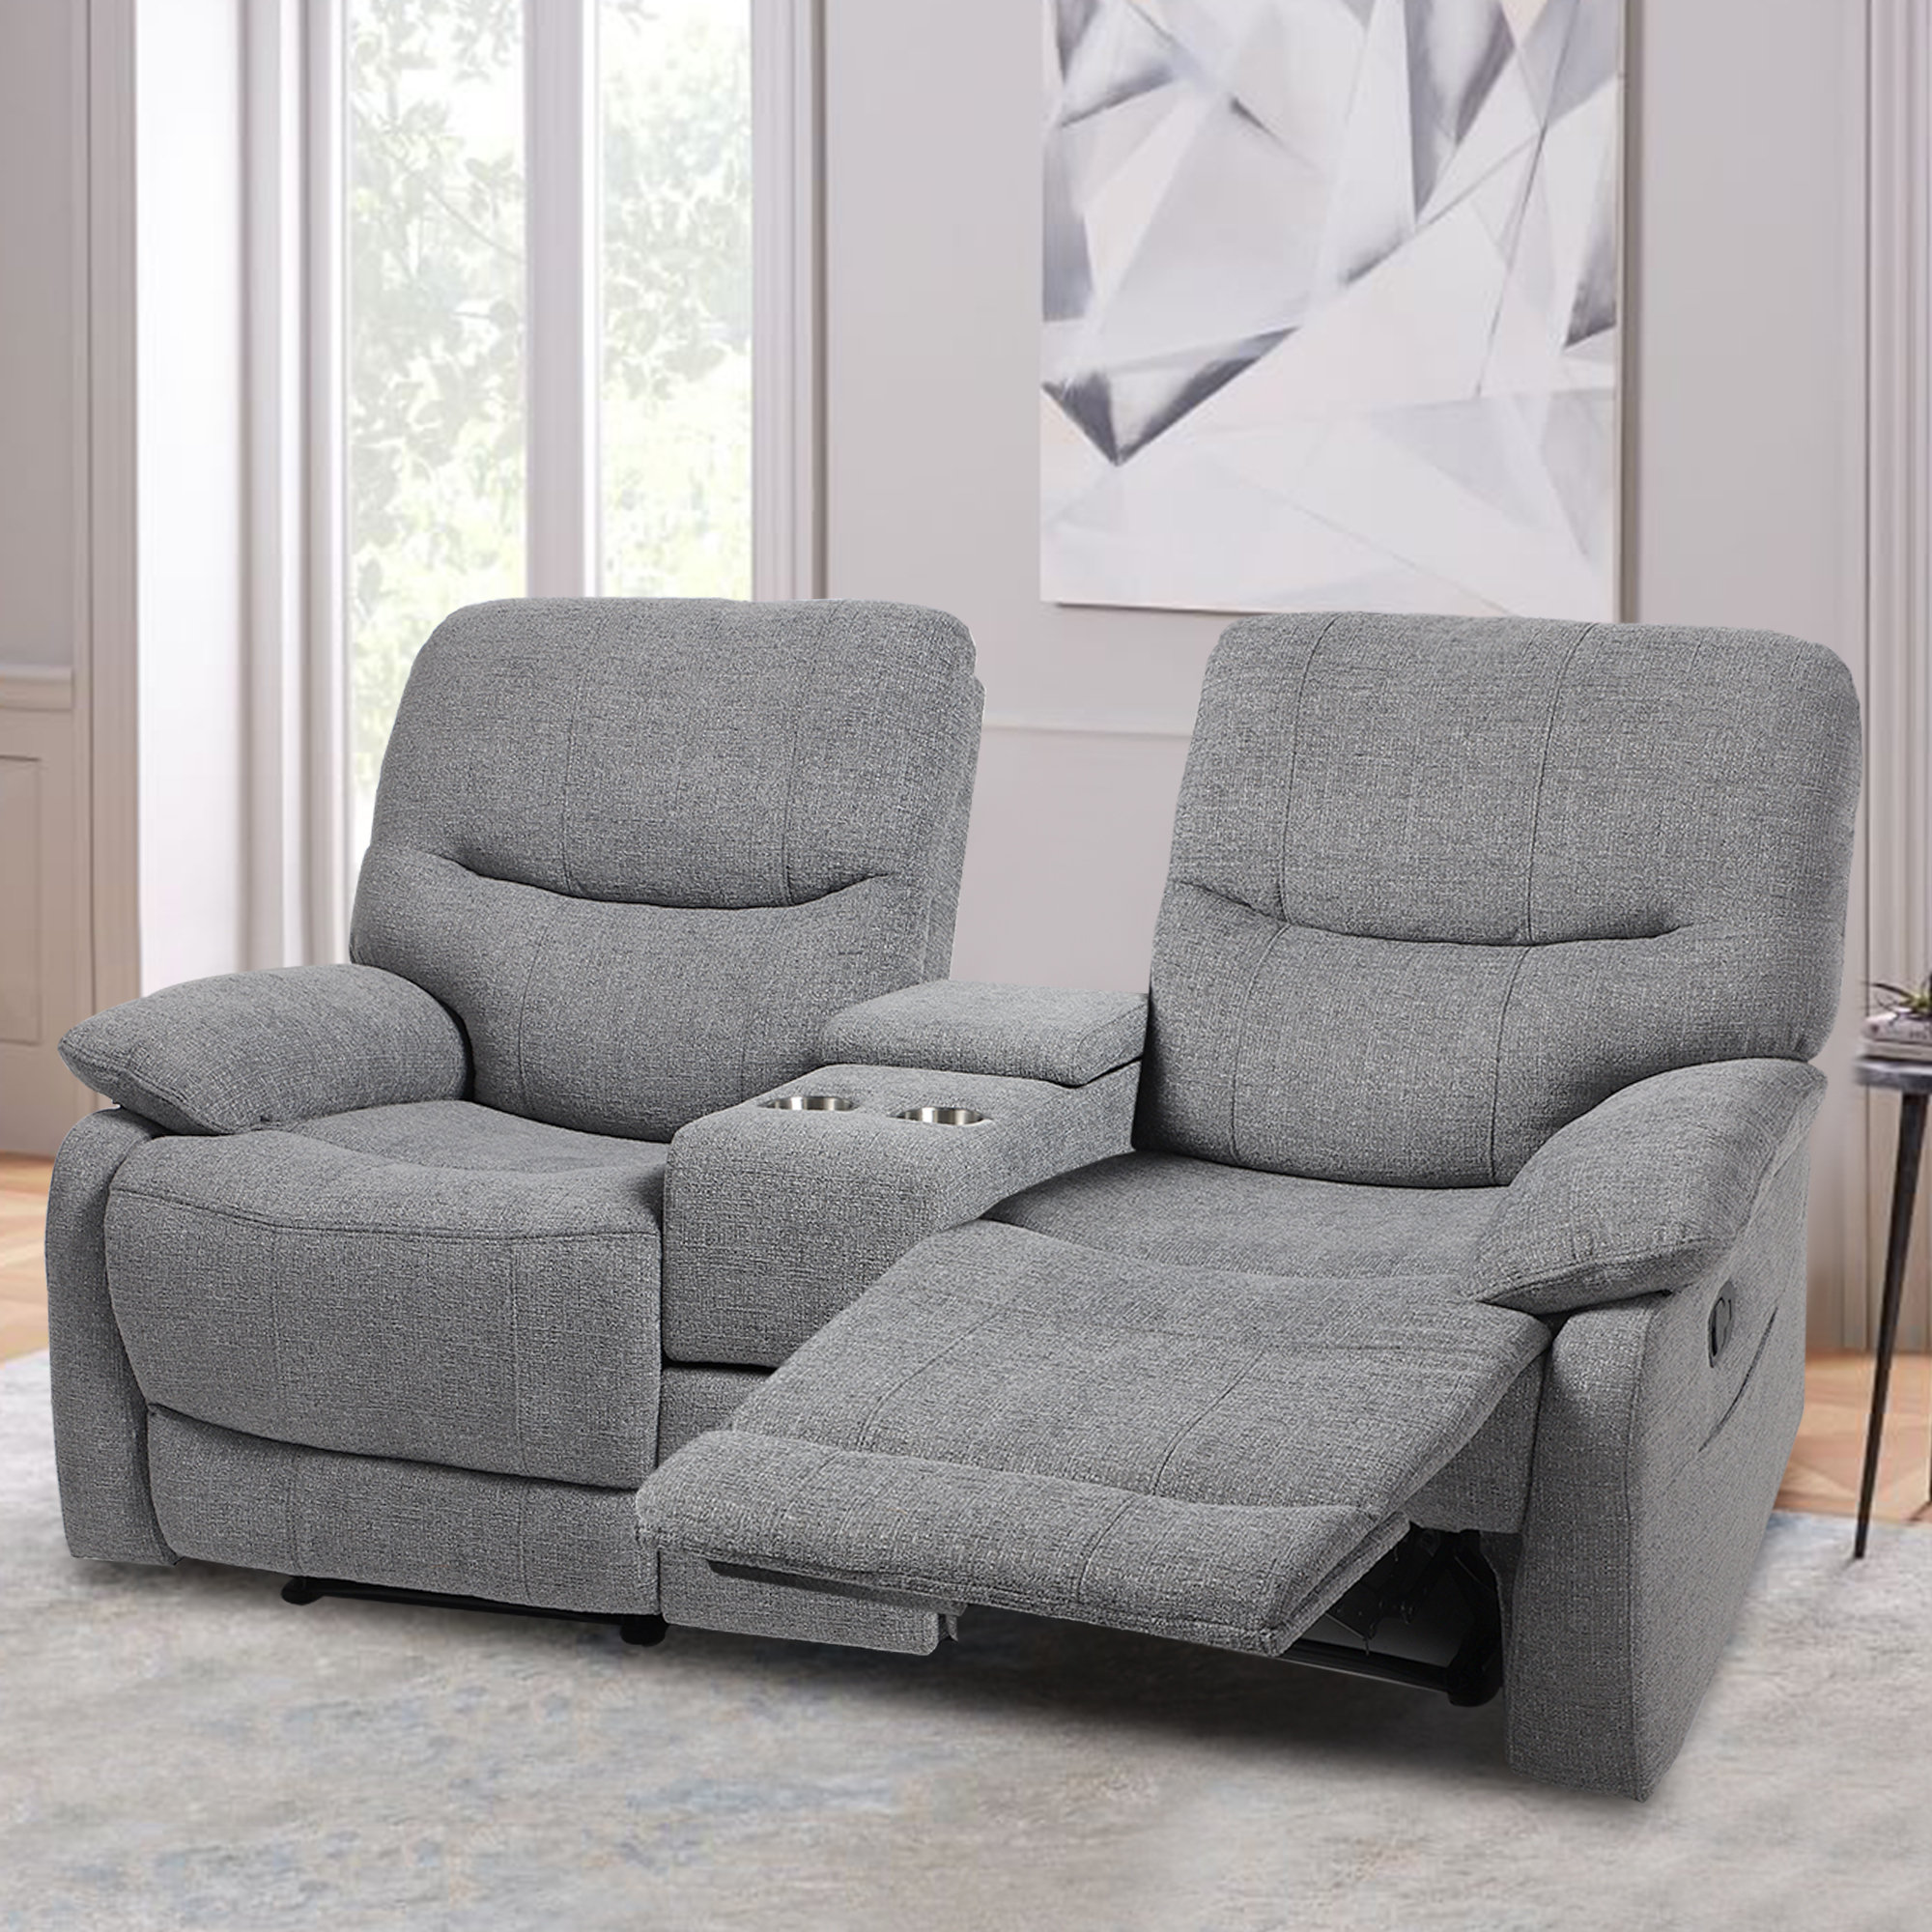 Homall Recliner Chair, Recliner Sofa Fabric for Adults, Recliners Home  Theater Seating with Lumbar Support, Reclining Sofa Chair for Living Room